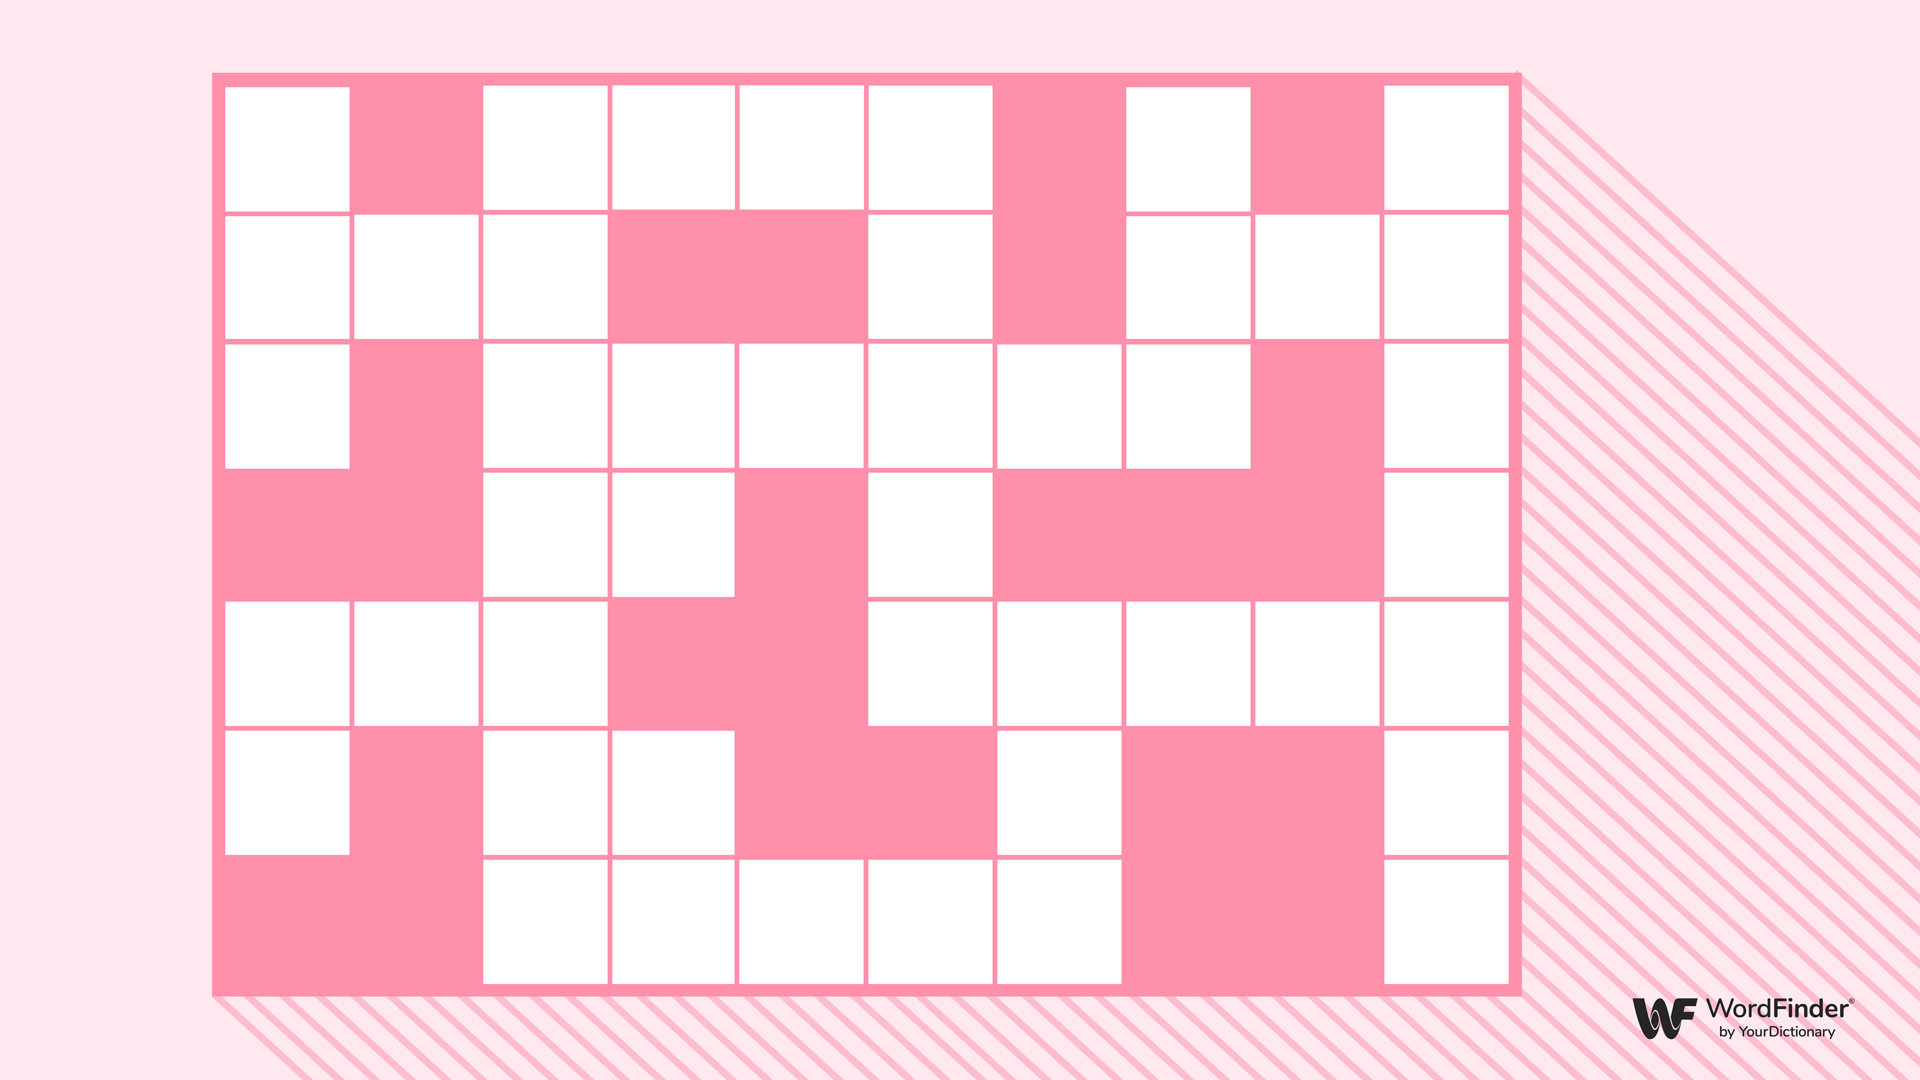 free daily crossword puzzle